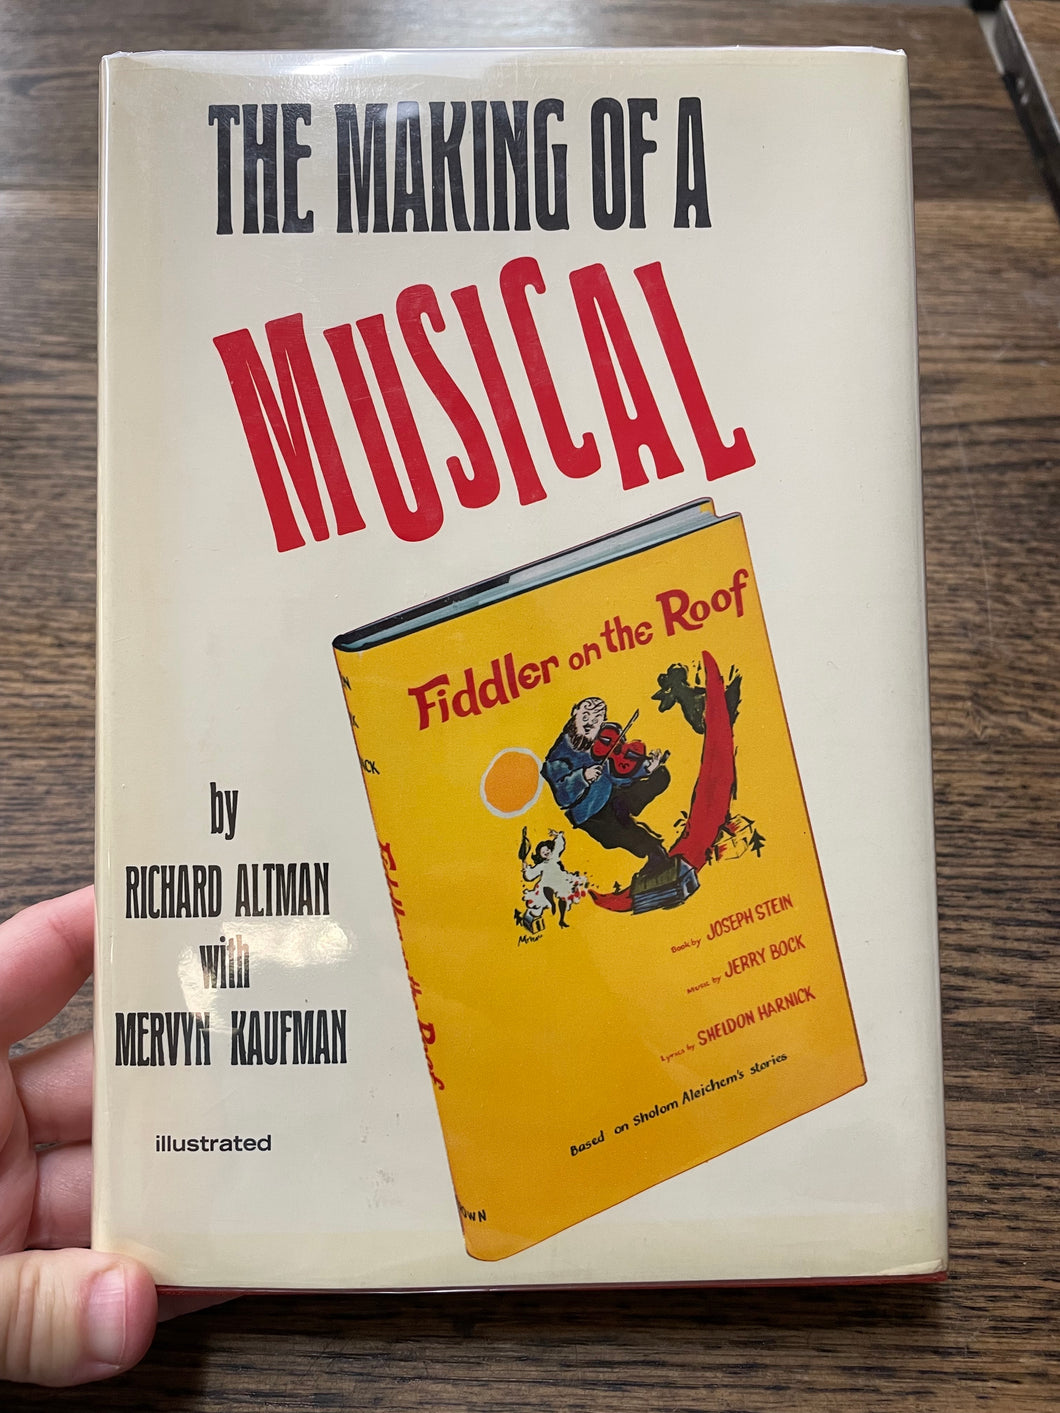 The Making of a Musical: Fiddler on The Roof